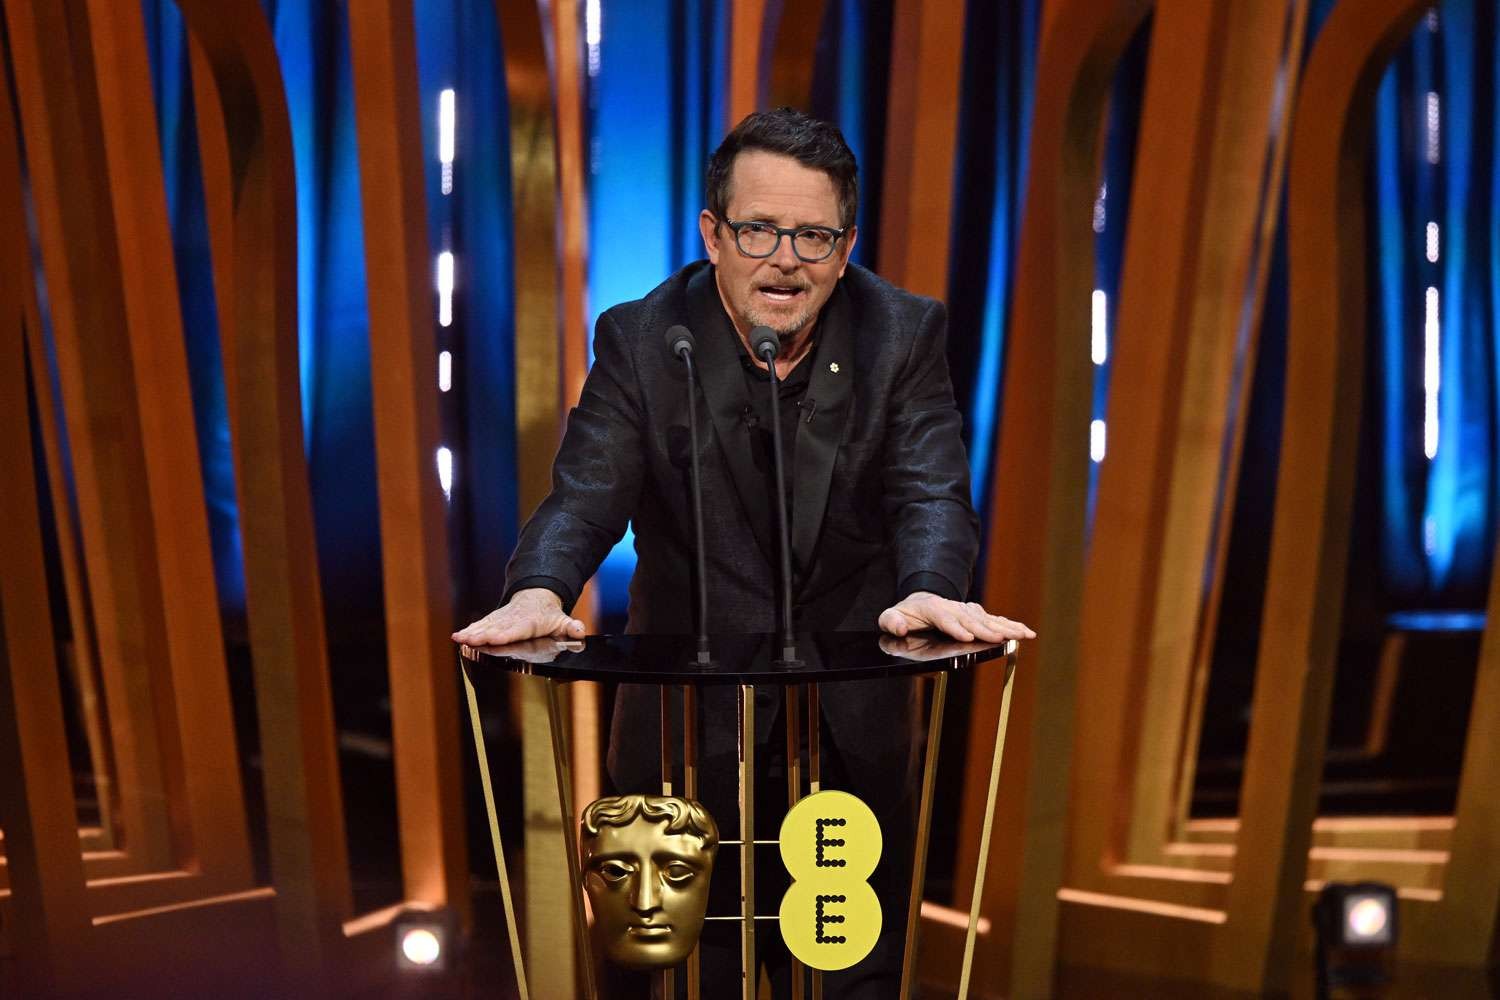 Michael J. Fox moved everyone with his heartfelt speech at the BAFTAs